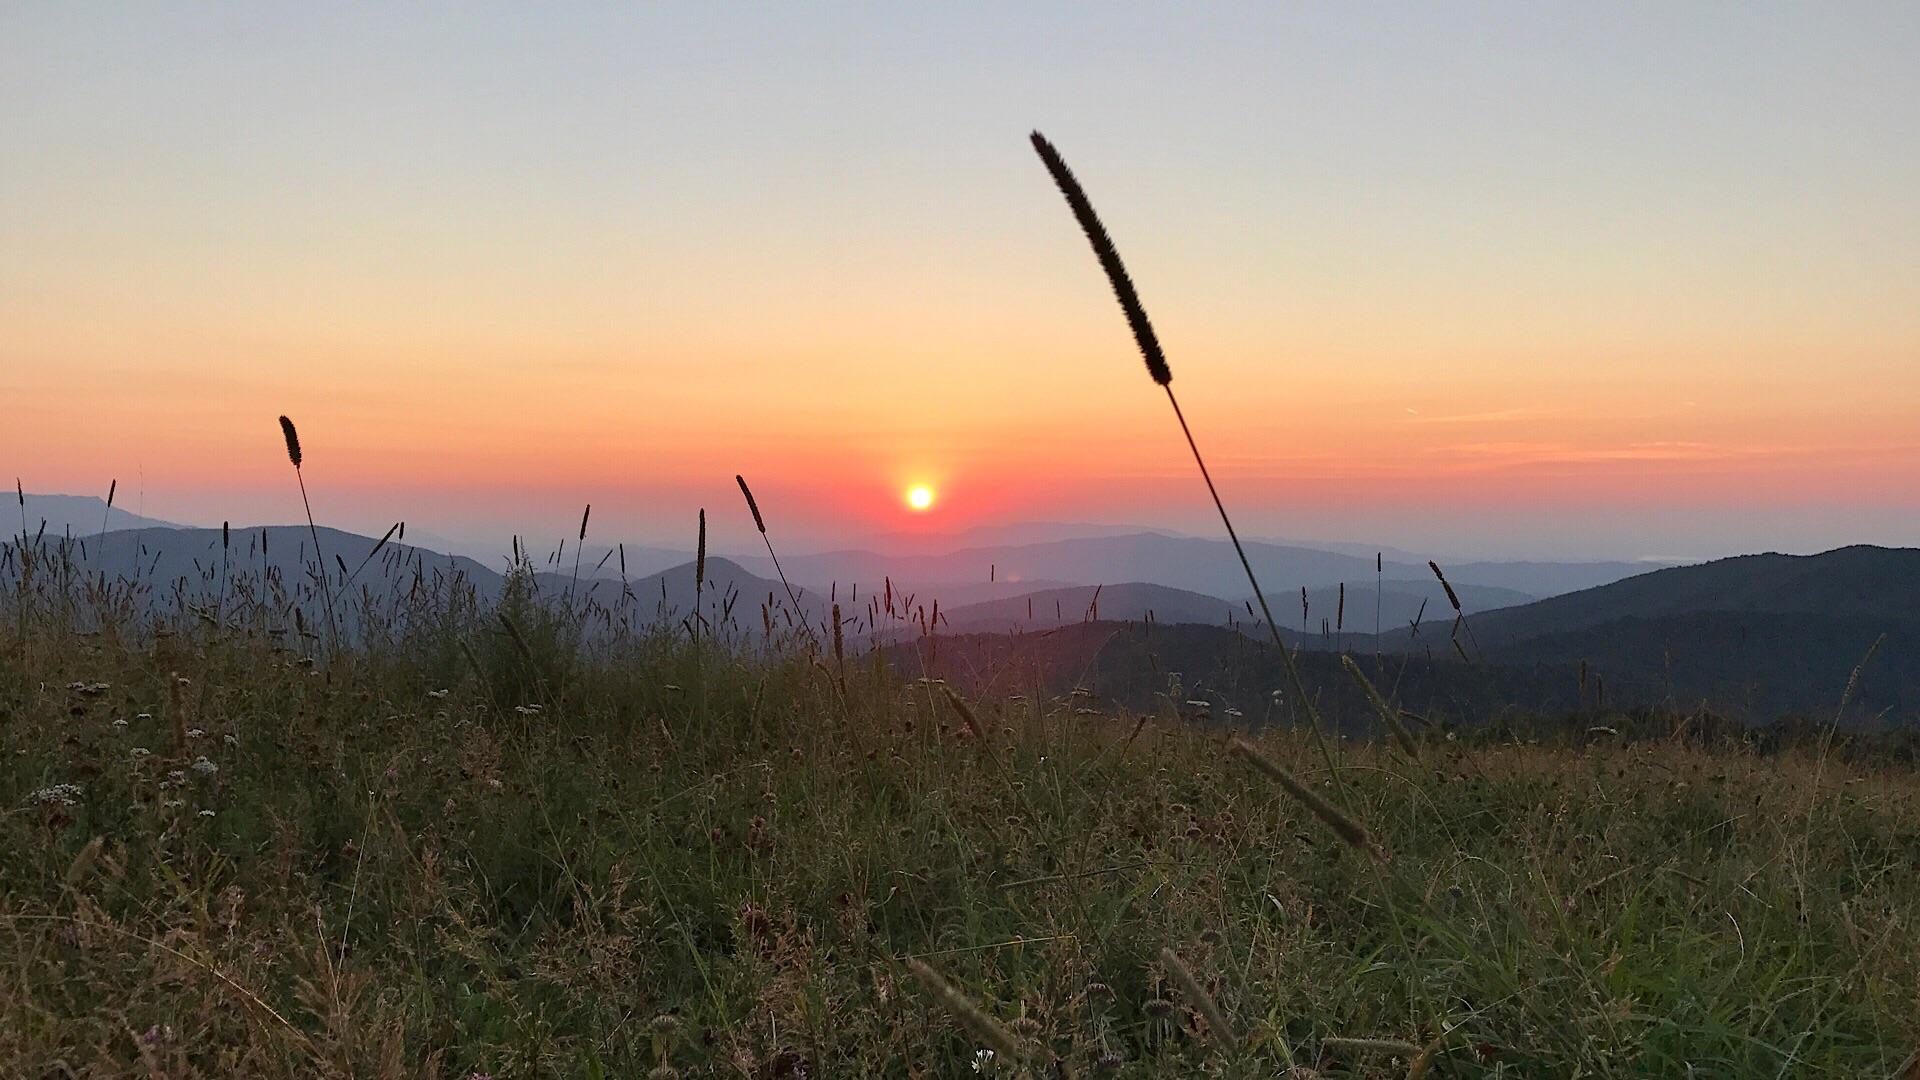 Sunset at Max Patch on the Appalachian trail [1920x1080]